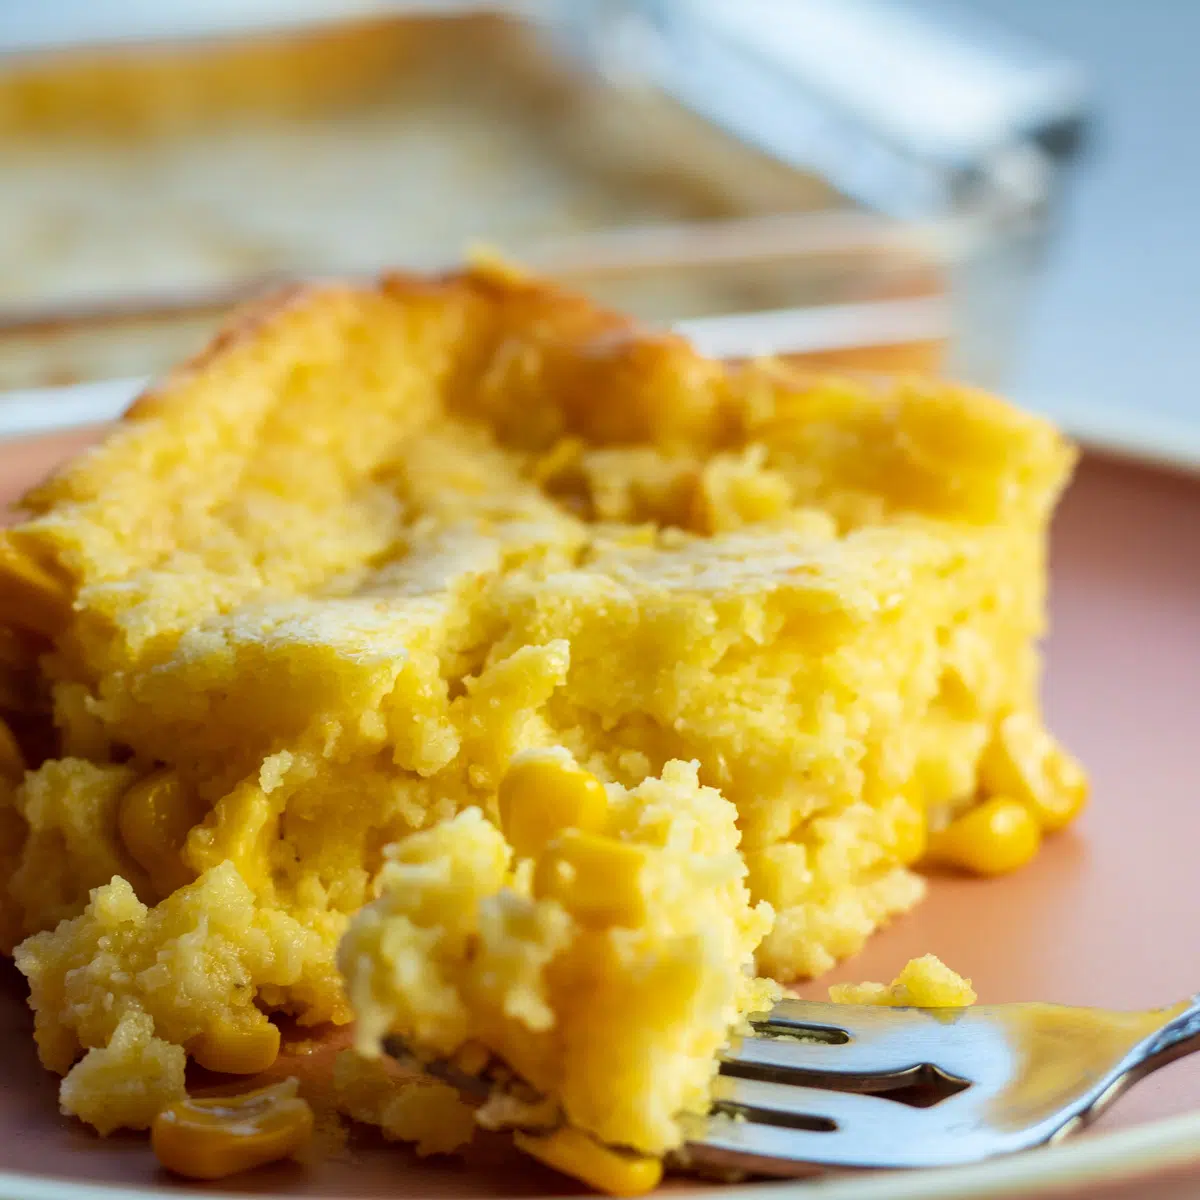 Jiffy corn casserole on light plate with a bite on fork.